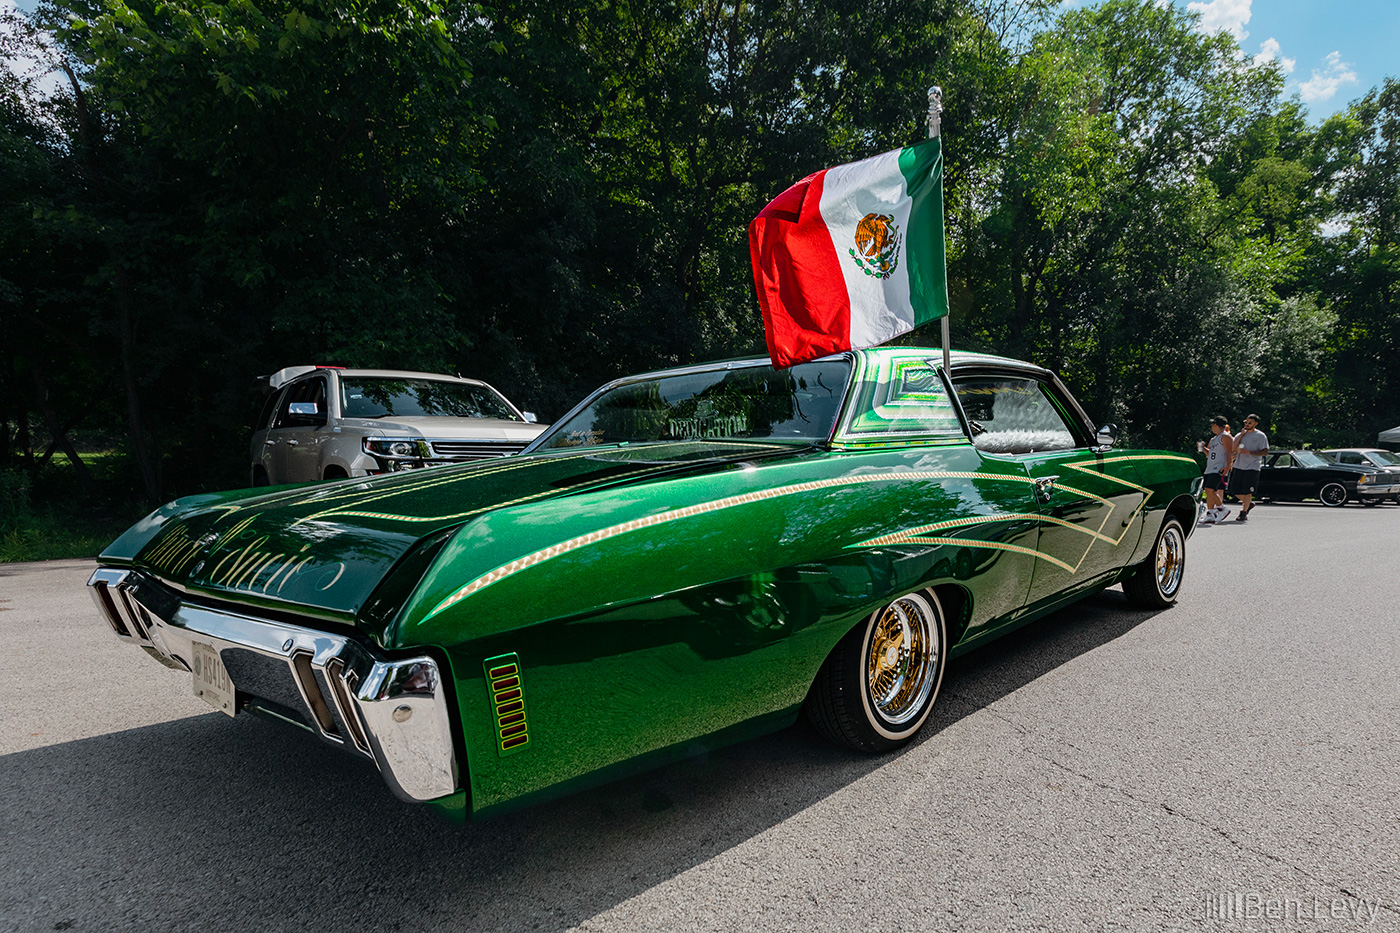 Green Two-Door Chevrolet Caprice with Mexican Flag Waving